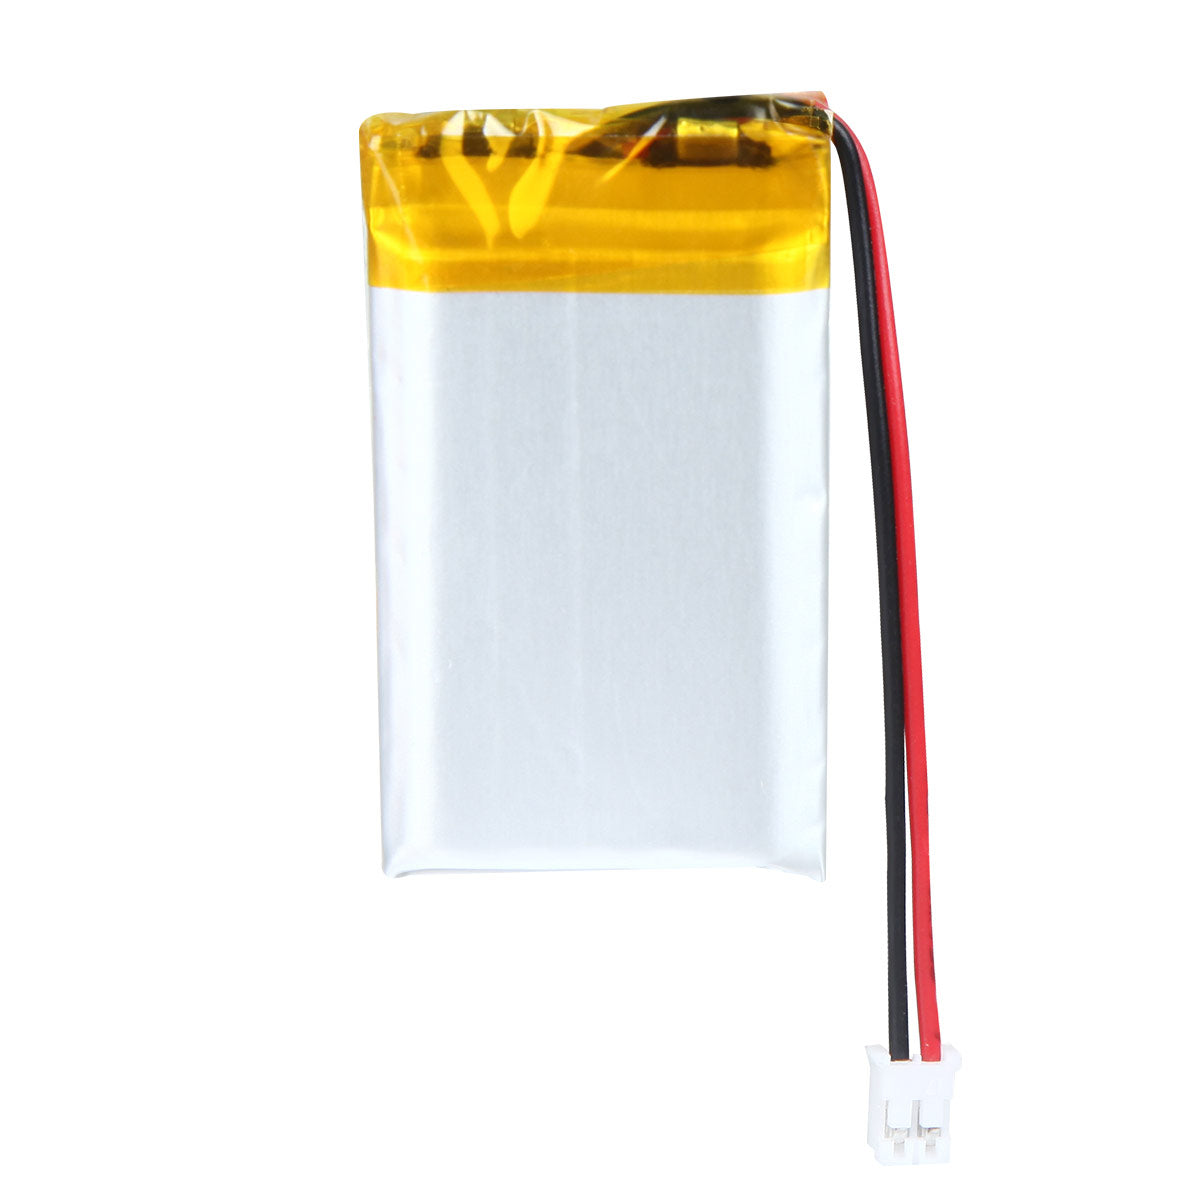 YDL 3.7V 650mAh 652540 Rechargeable Lithium  Polymer Battery Length 42mm